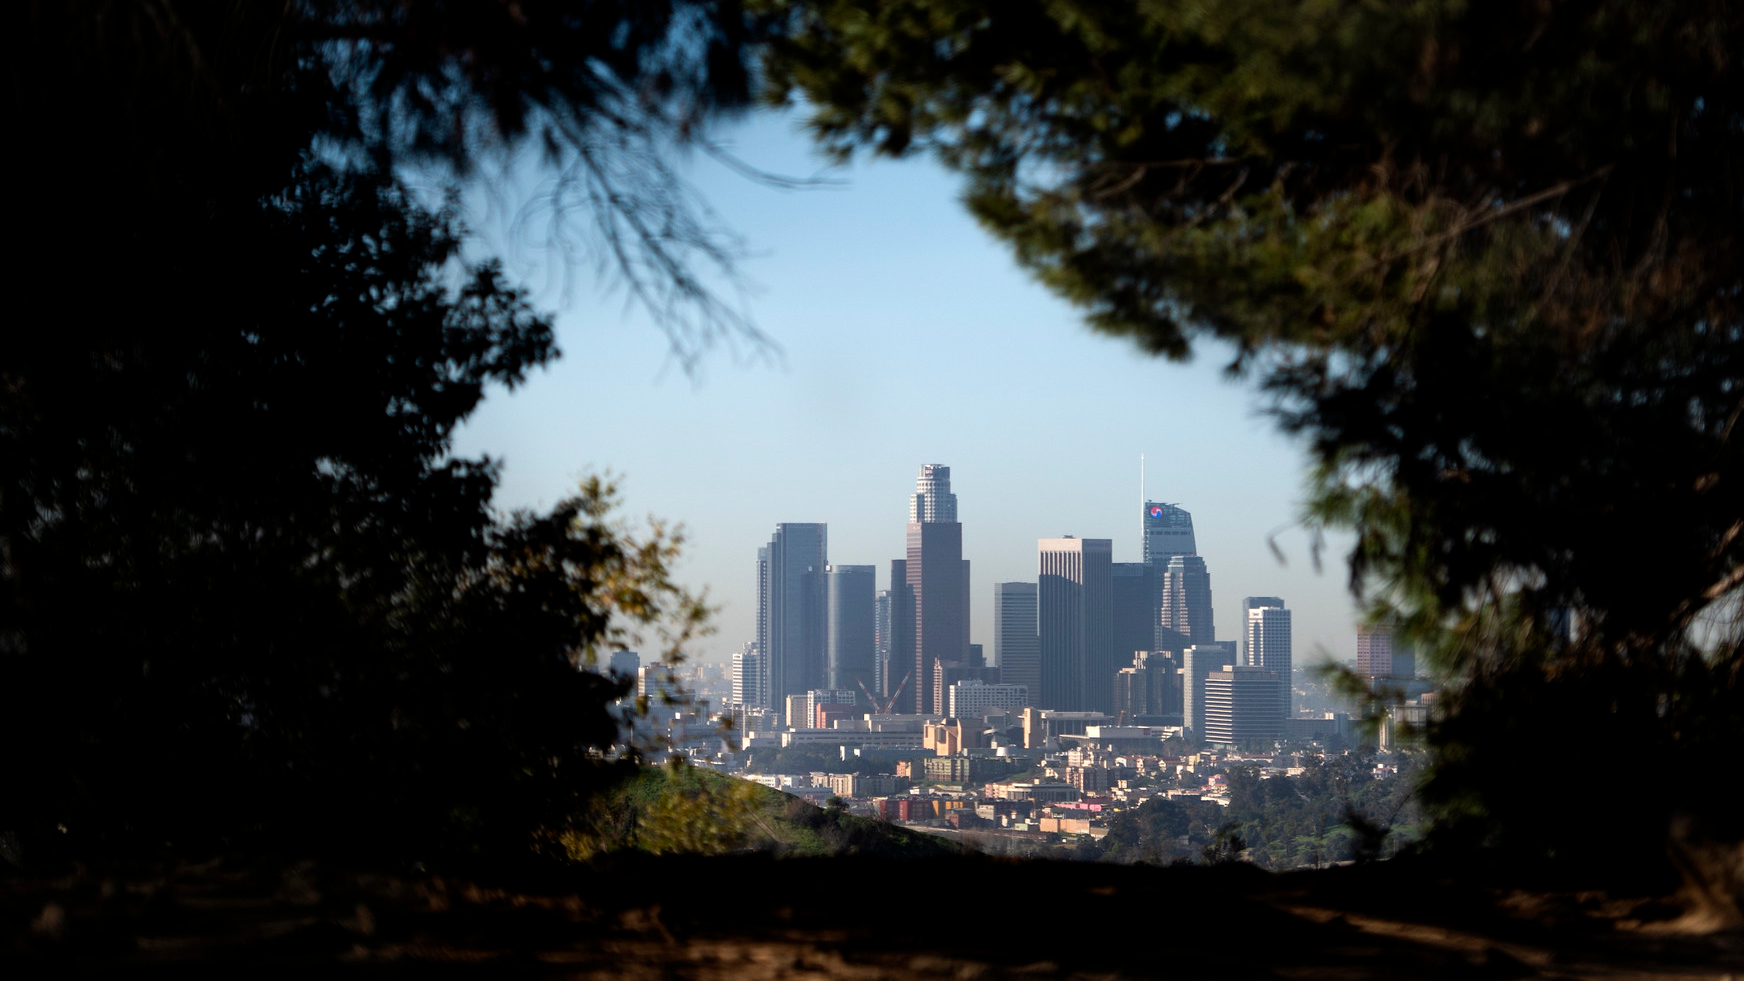 Downtown Los Angeles is seen through the trees.